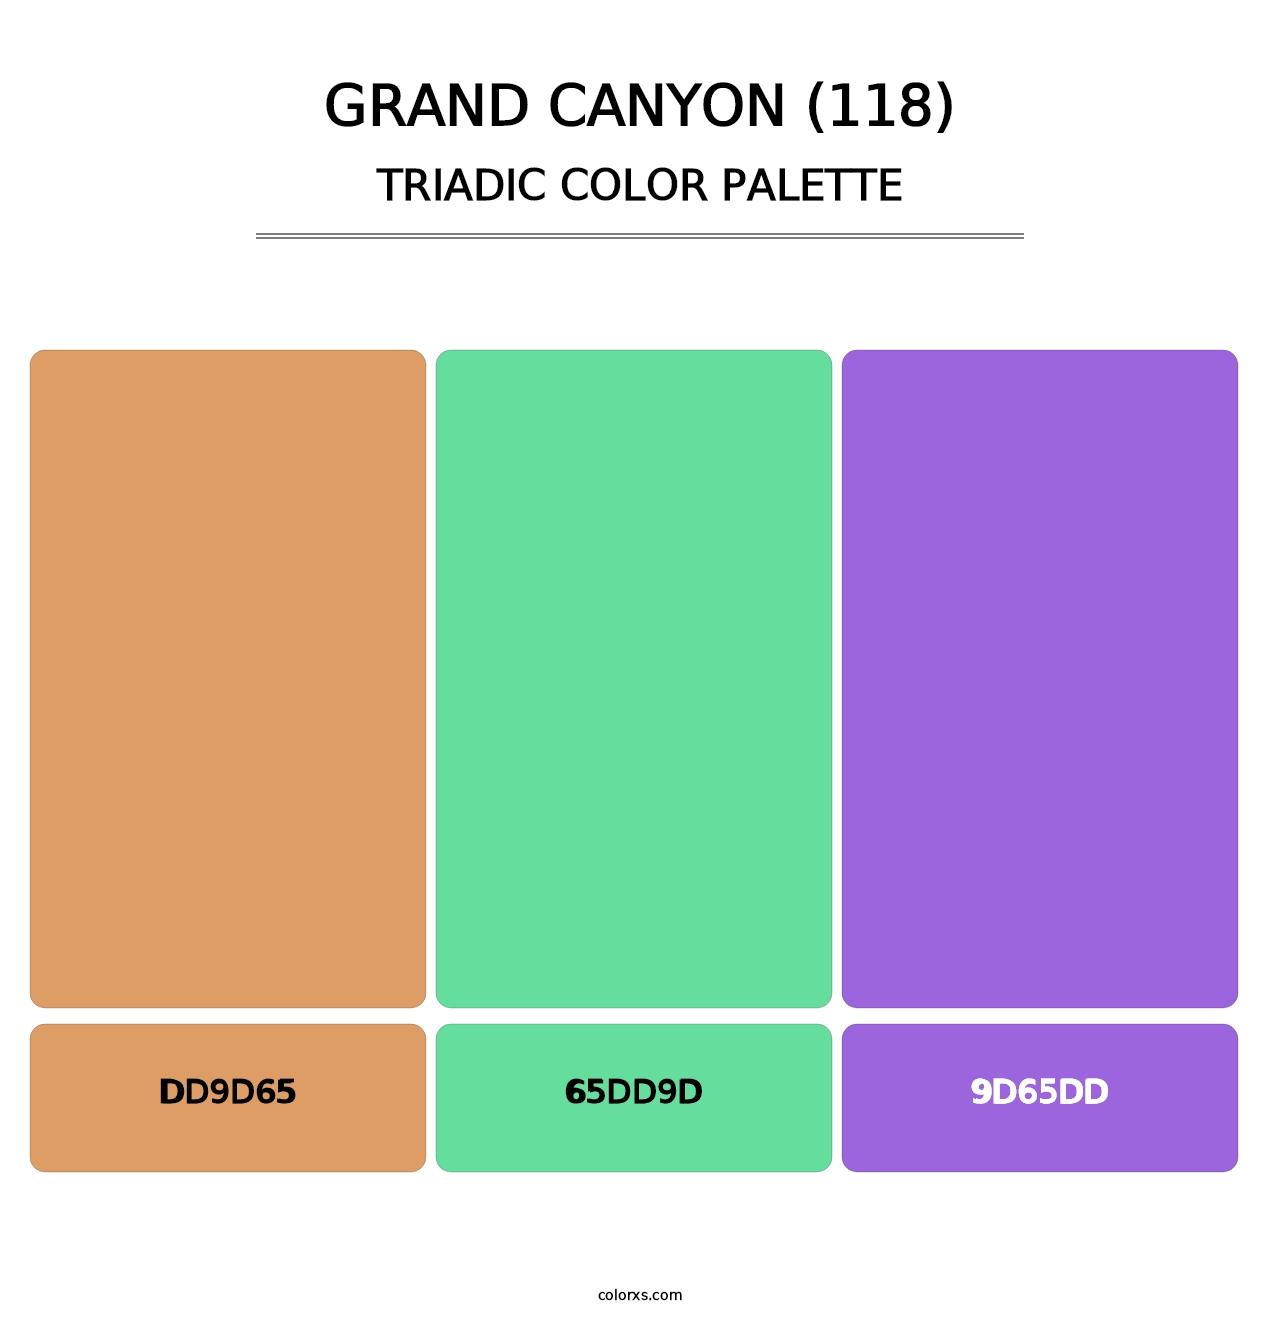 Grand Canyon (118) - Triadic Color Palette